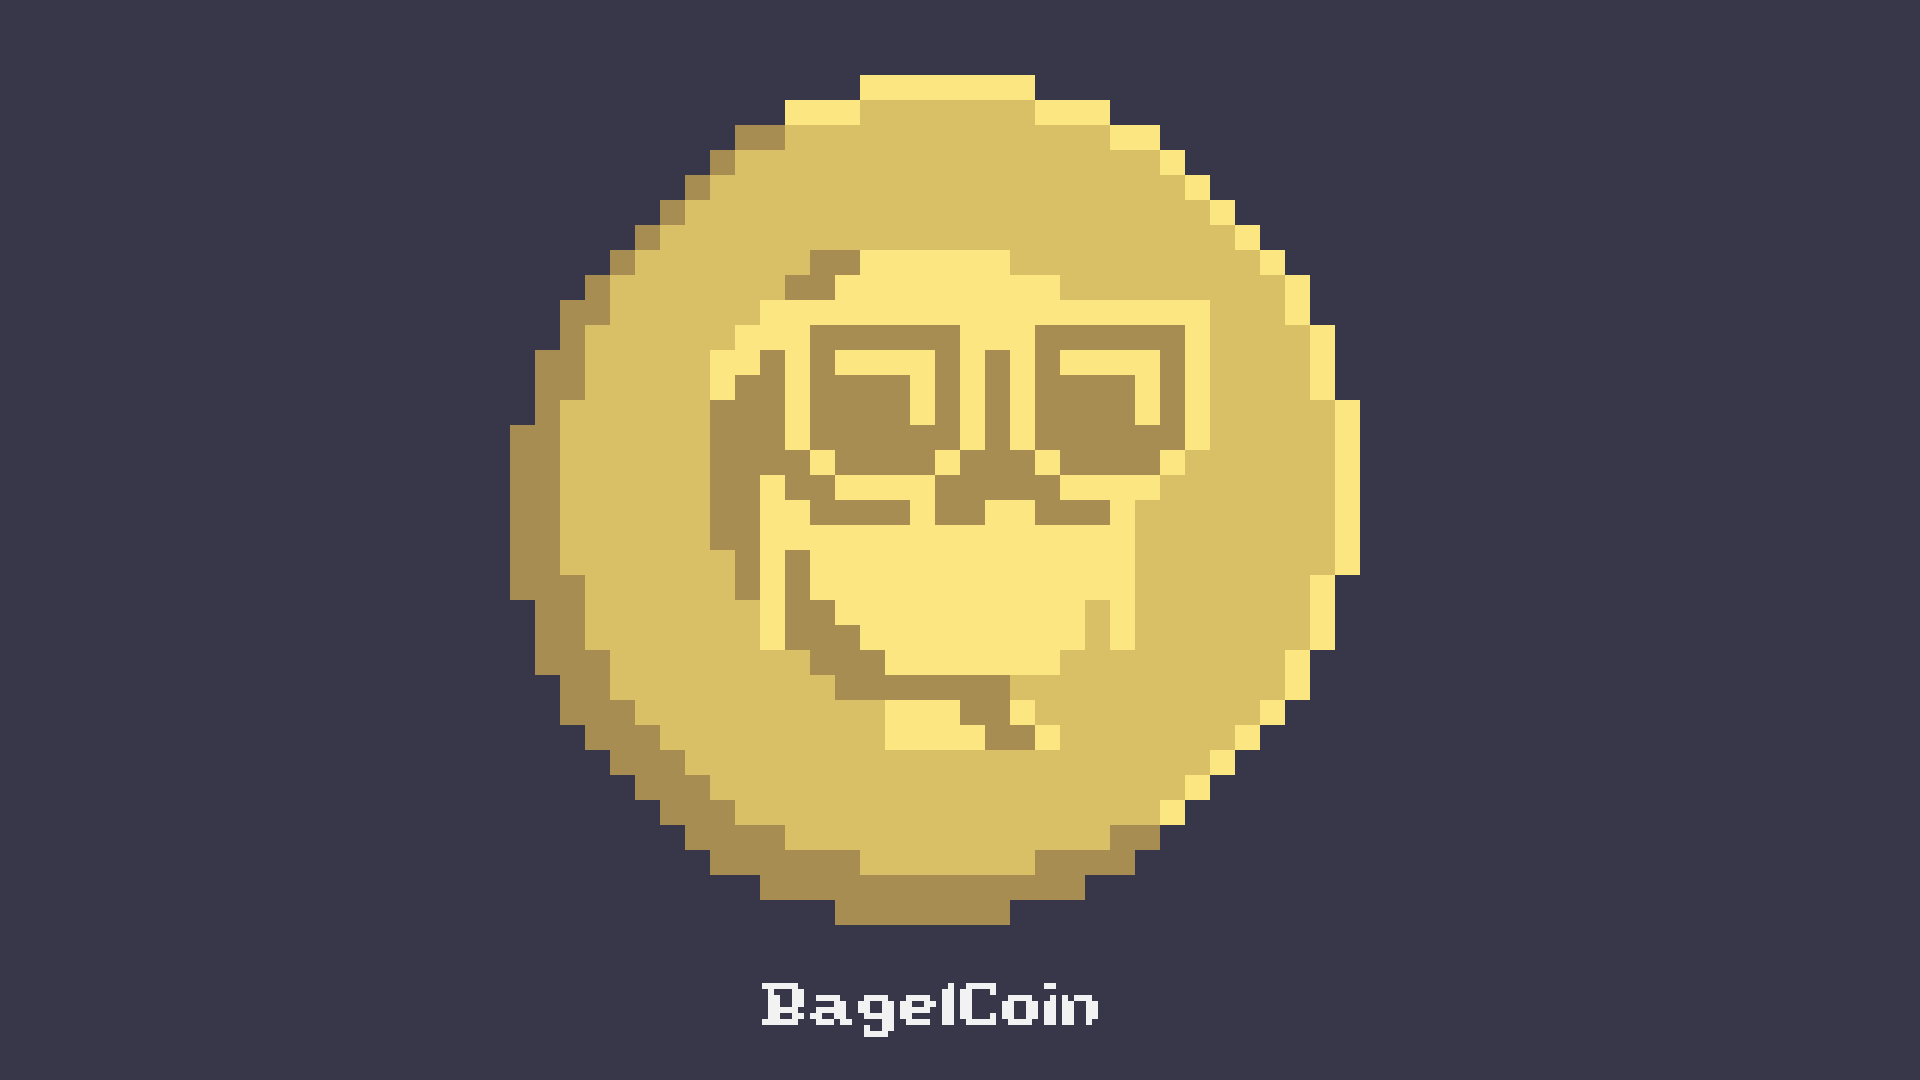 BagelCoin, a future cryptocurrency